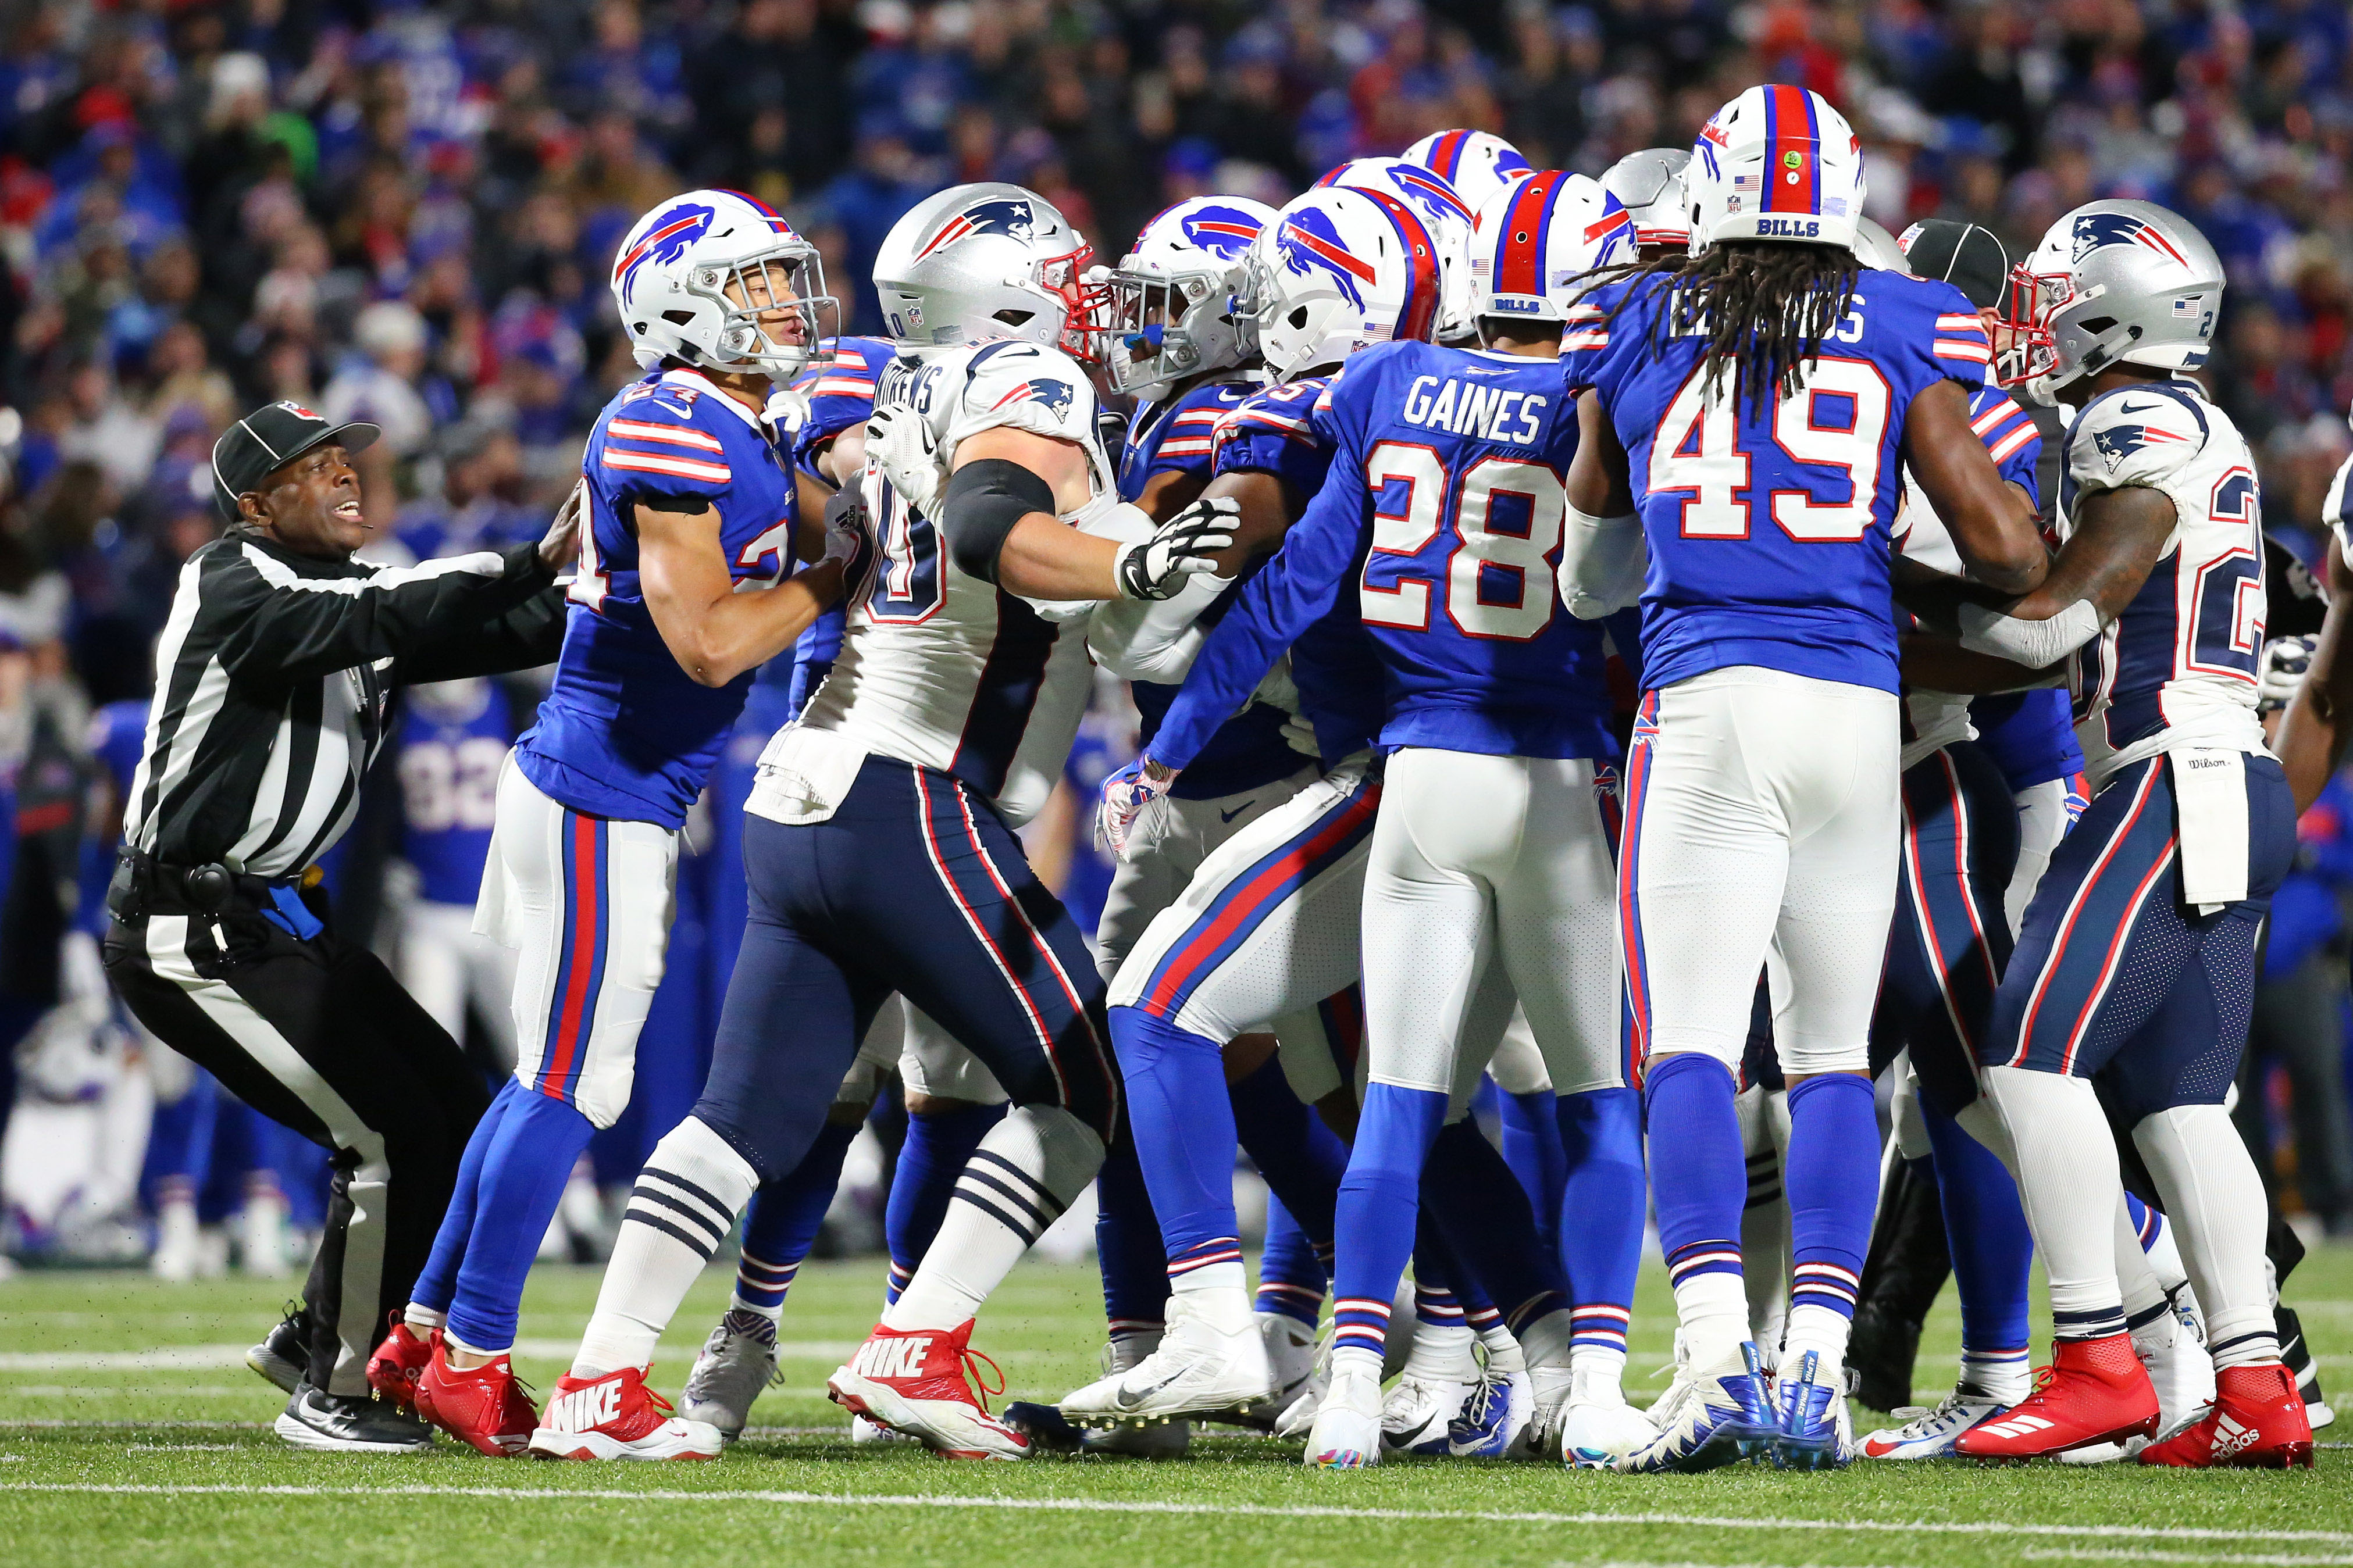 7 storylines to watch for during Buffalo Bills v. New England Patriots